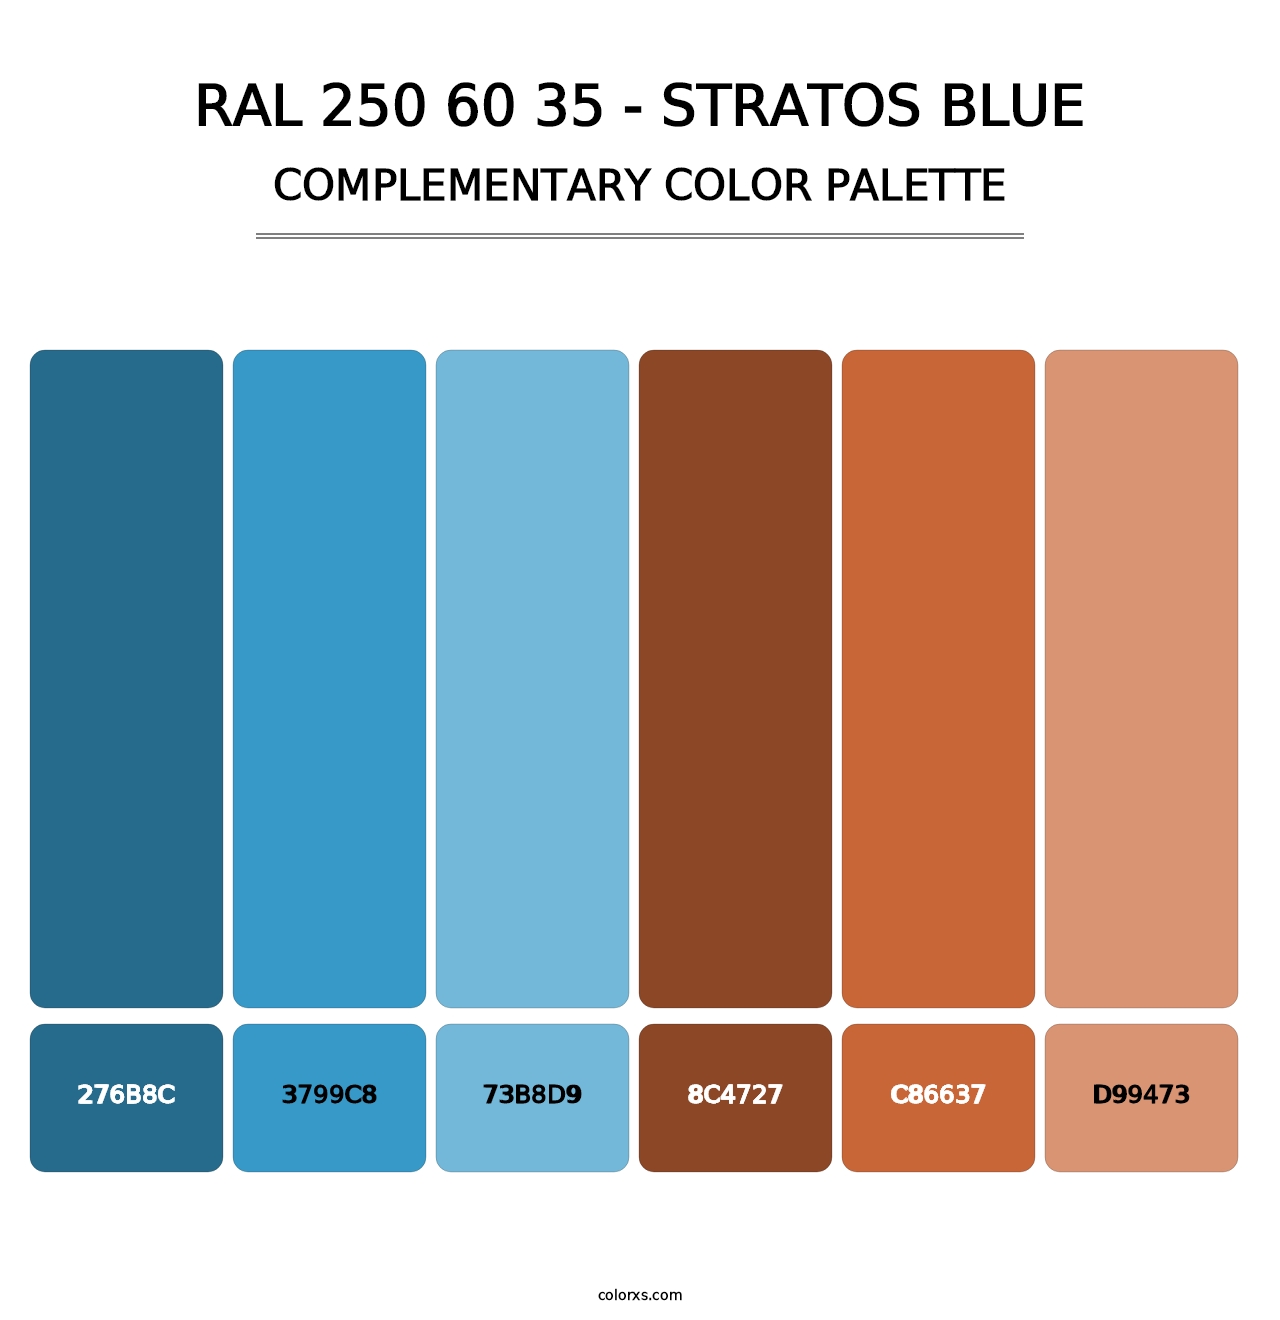 RAL 250 60 35 - Stratos Blue - Complementary Color Palette